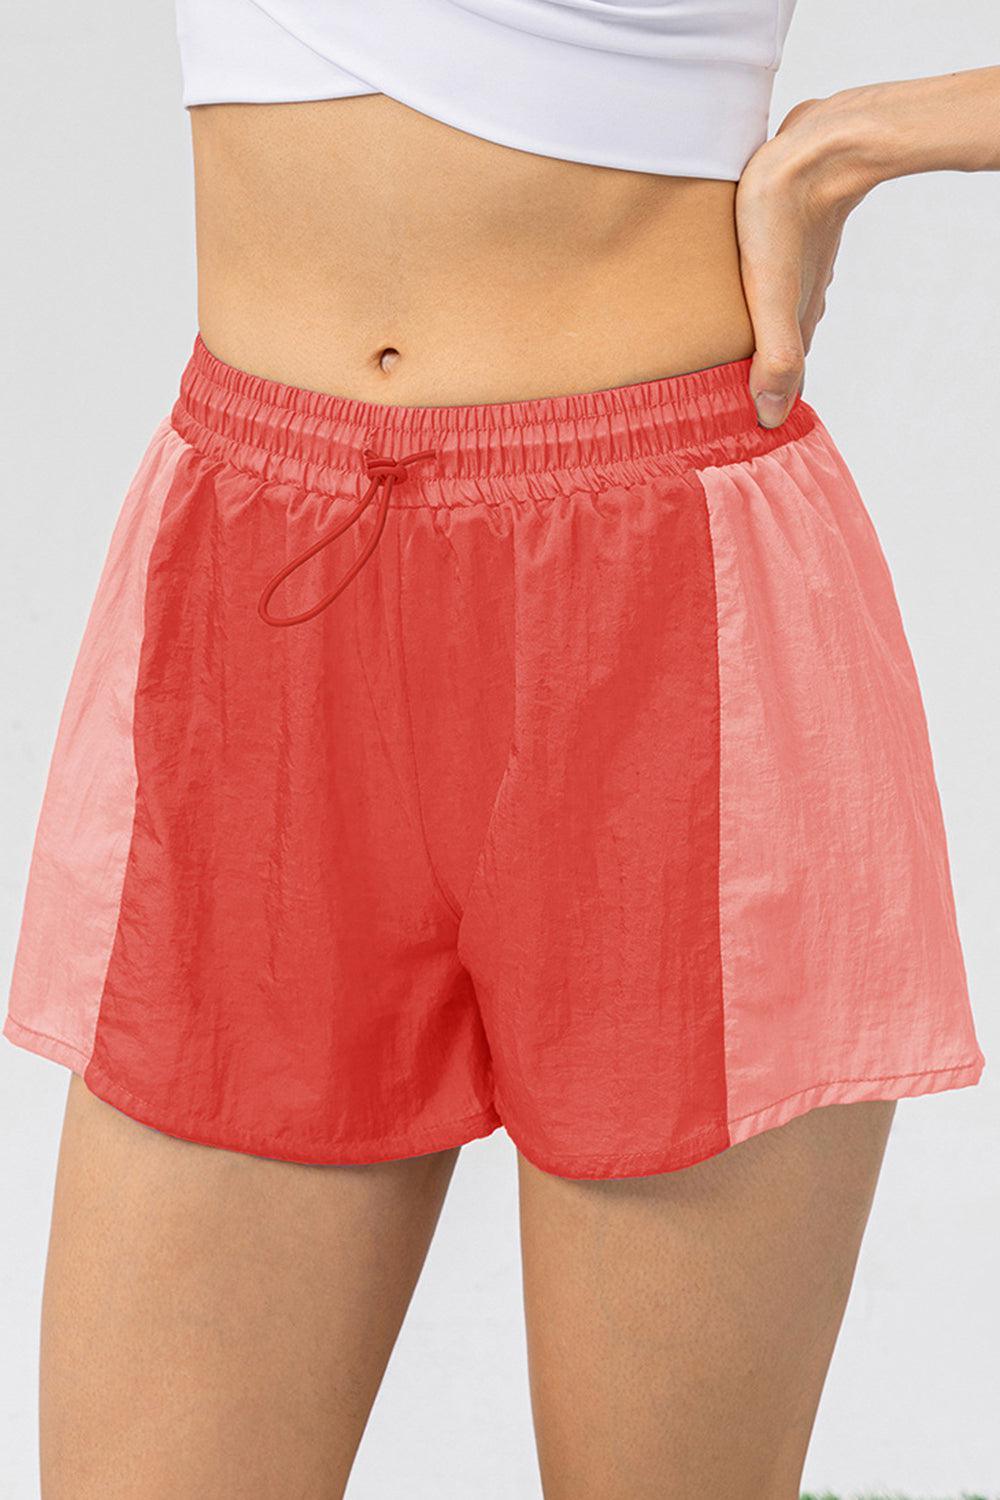 a close up of a person wearing a red shorts